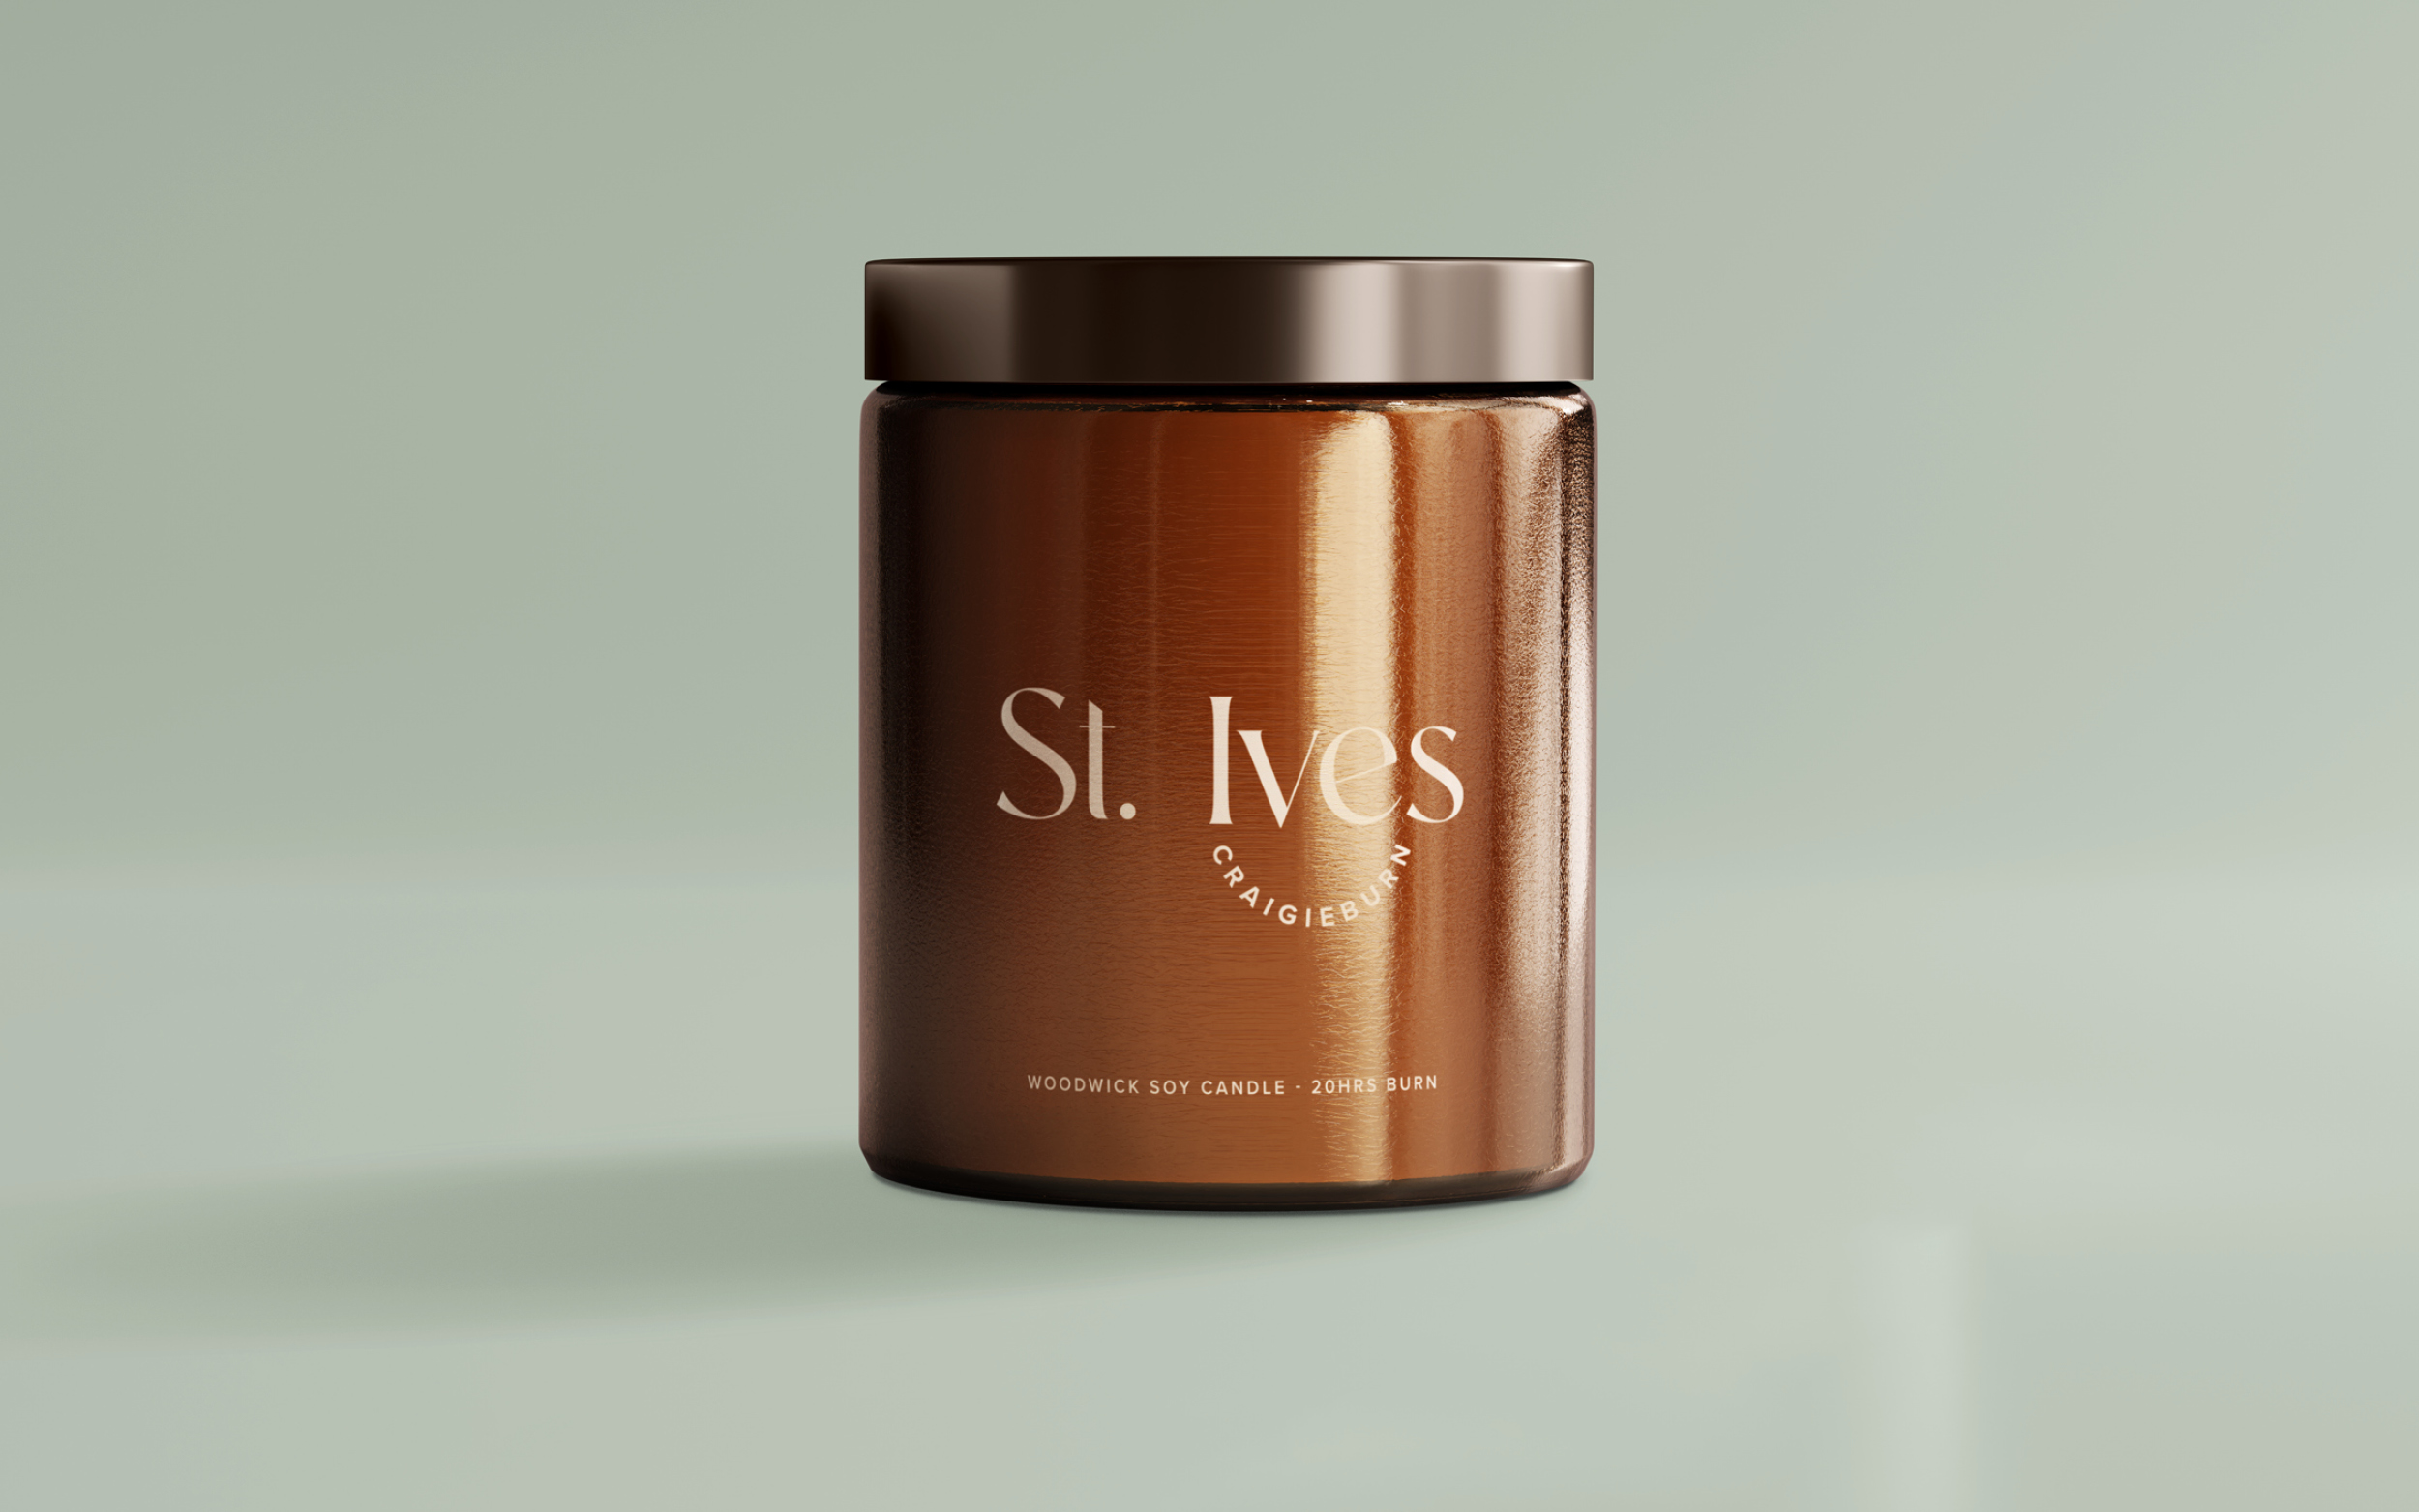 Candle with St Ives branding